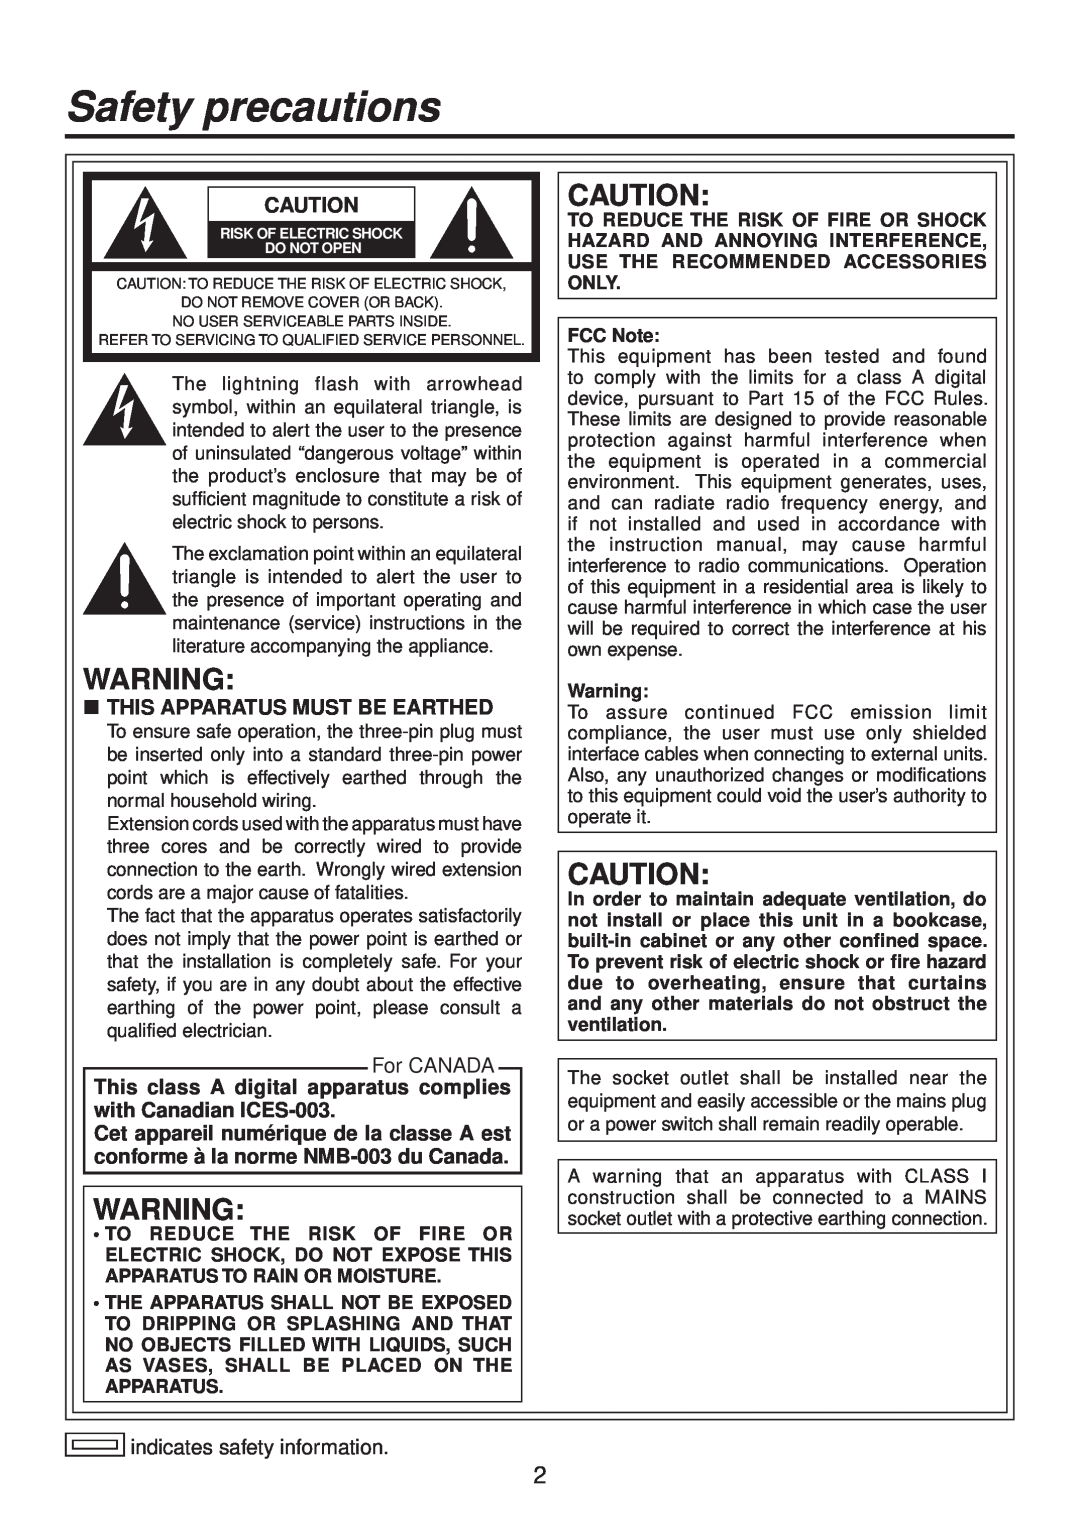 Panasonic AV-HS400AN manual Safety precautions,  This Apparatus Must Be Earthed, For CANADA, indicates safety information 